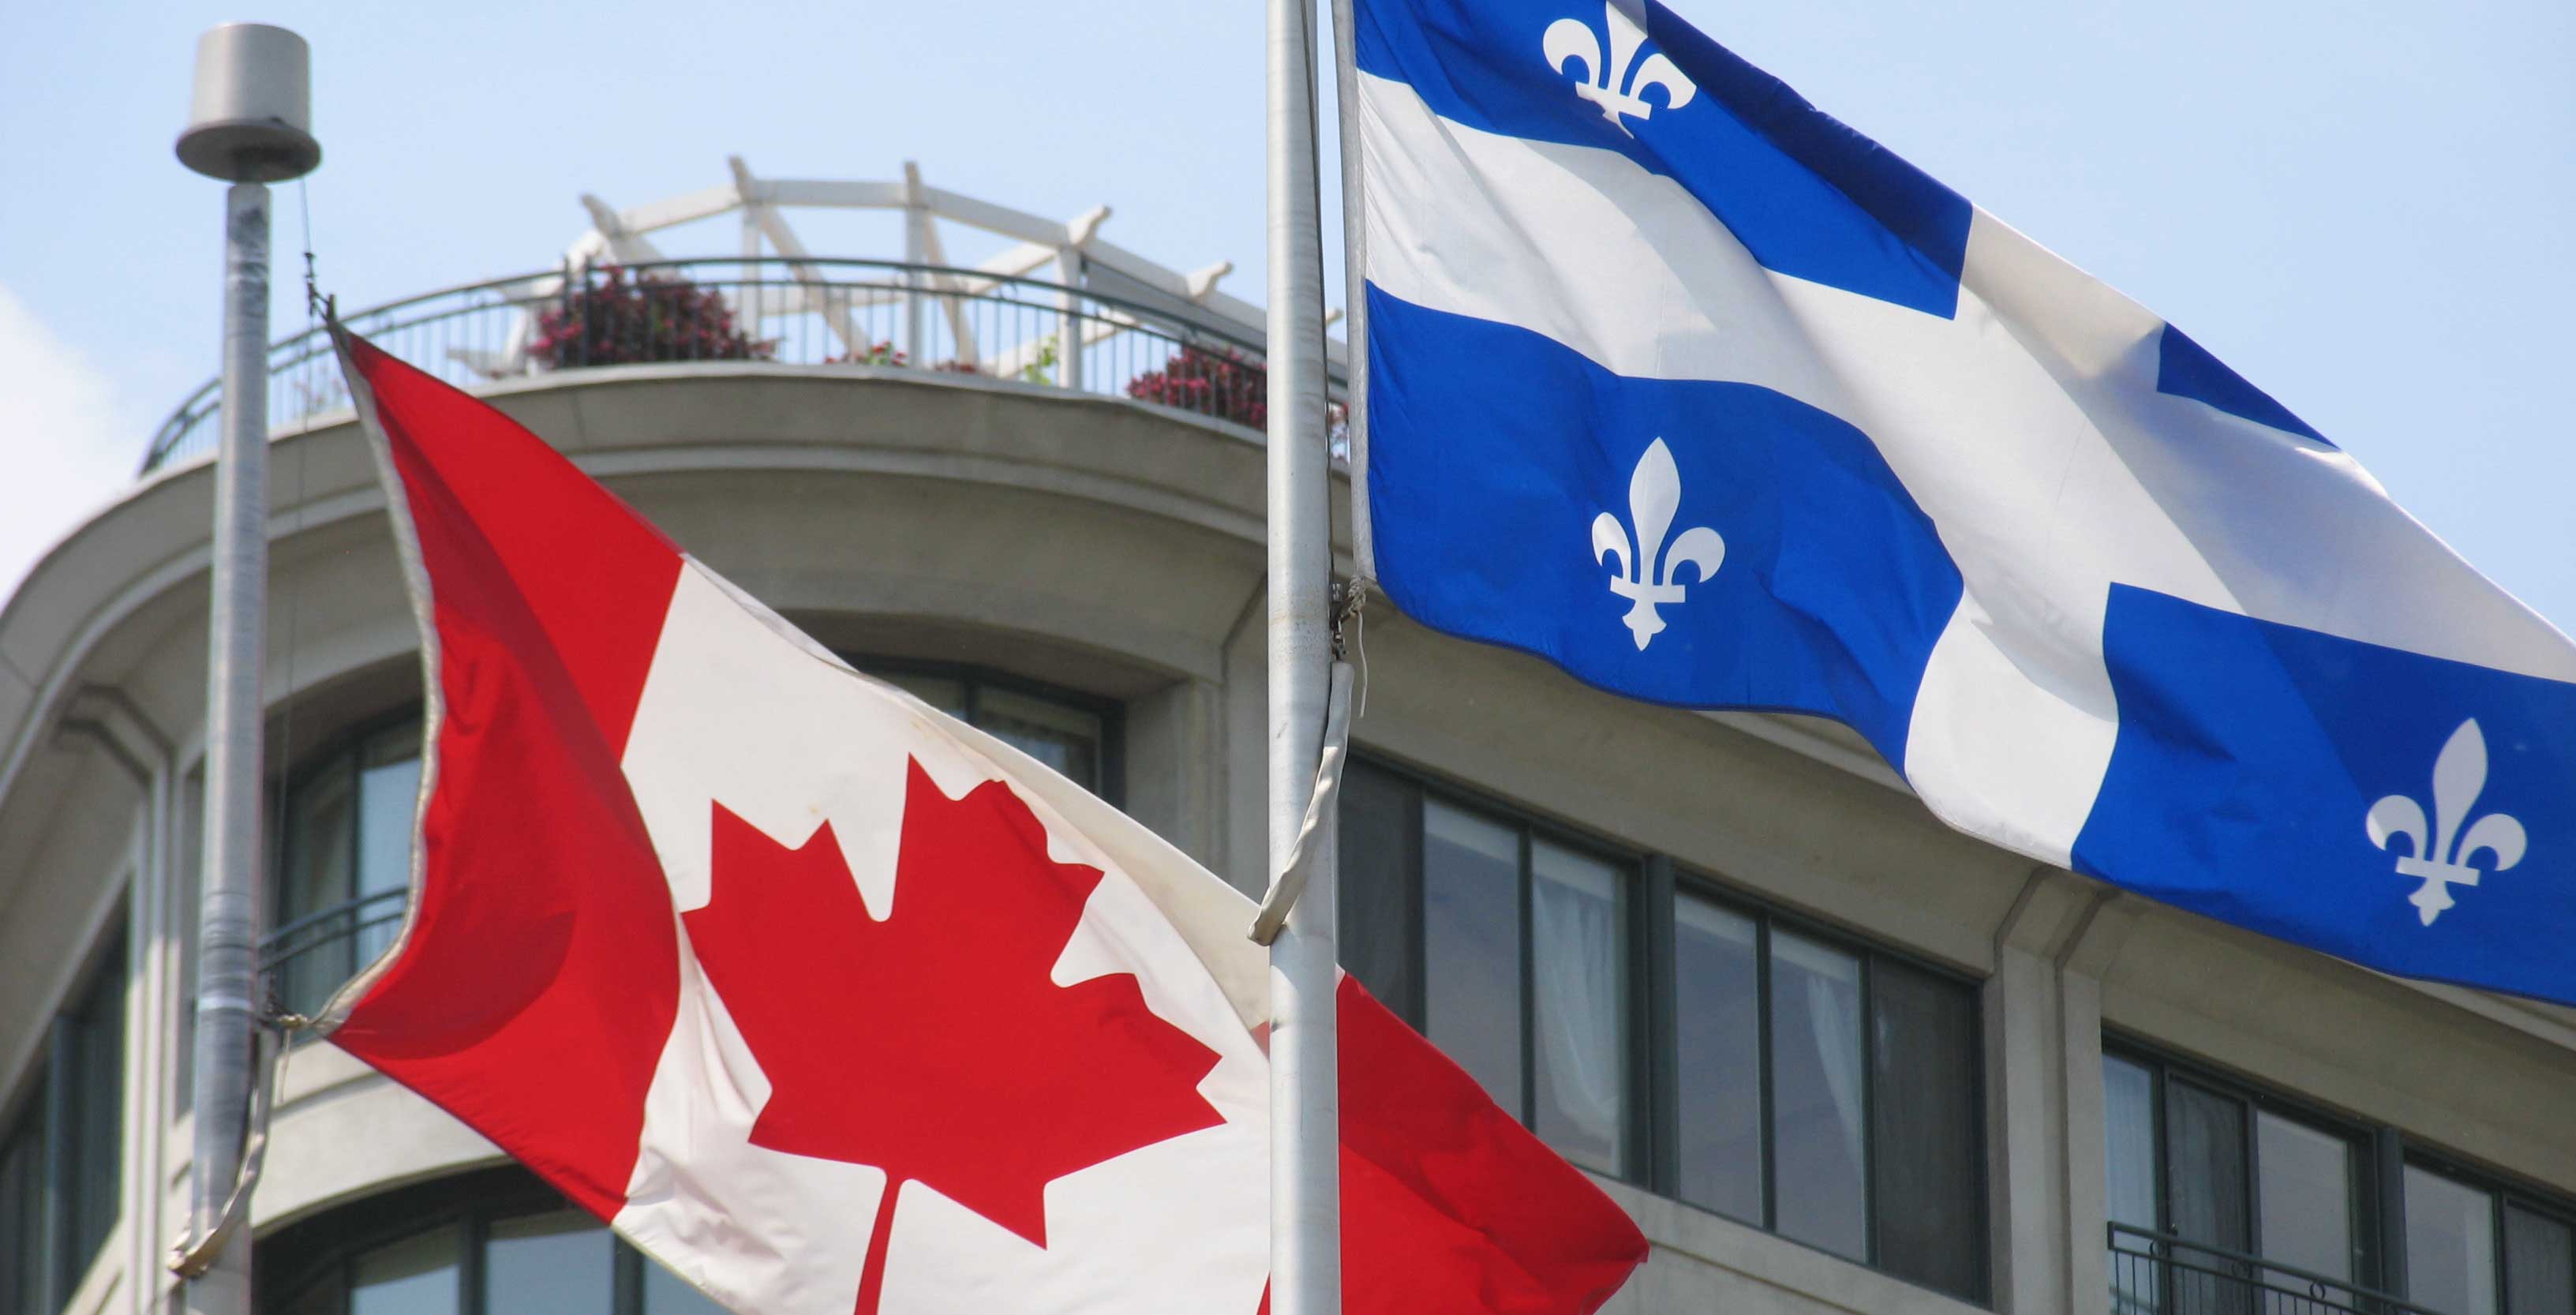 An image of the Quebec and Canada flags